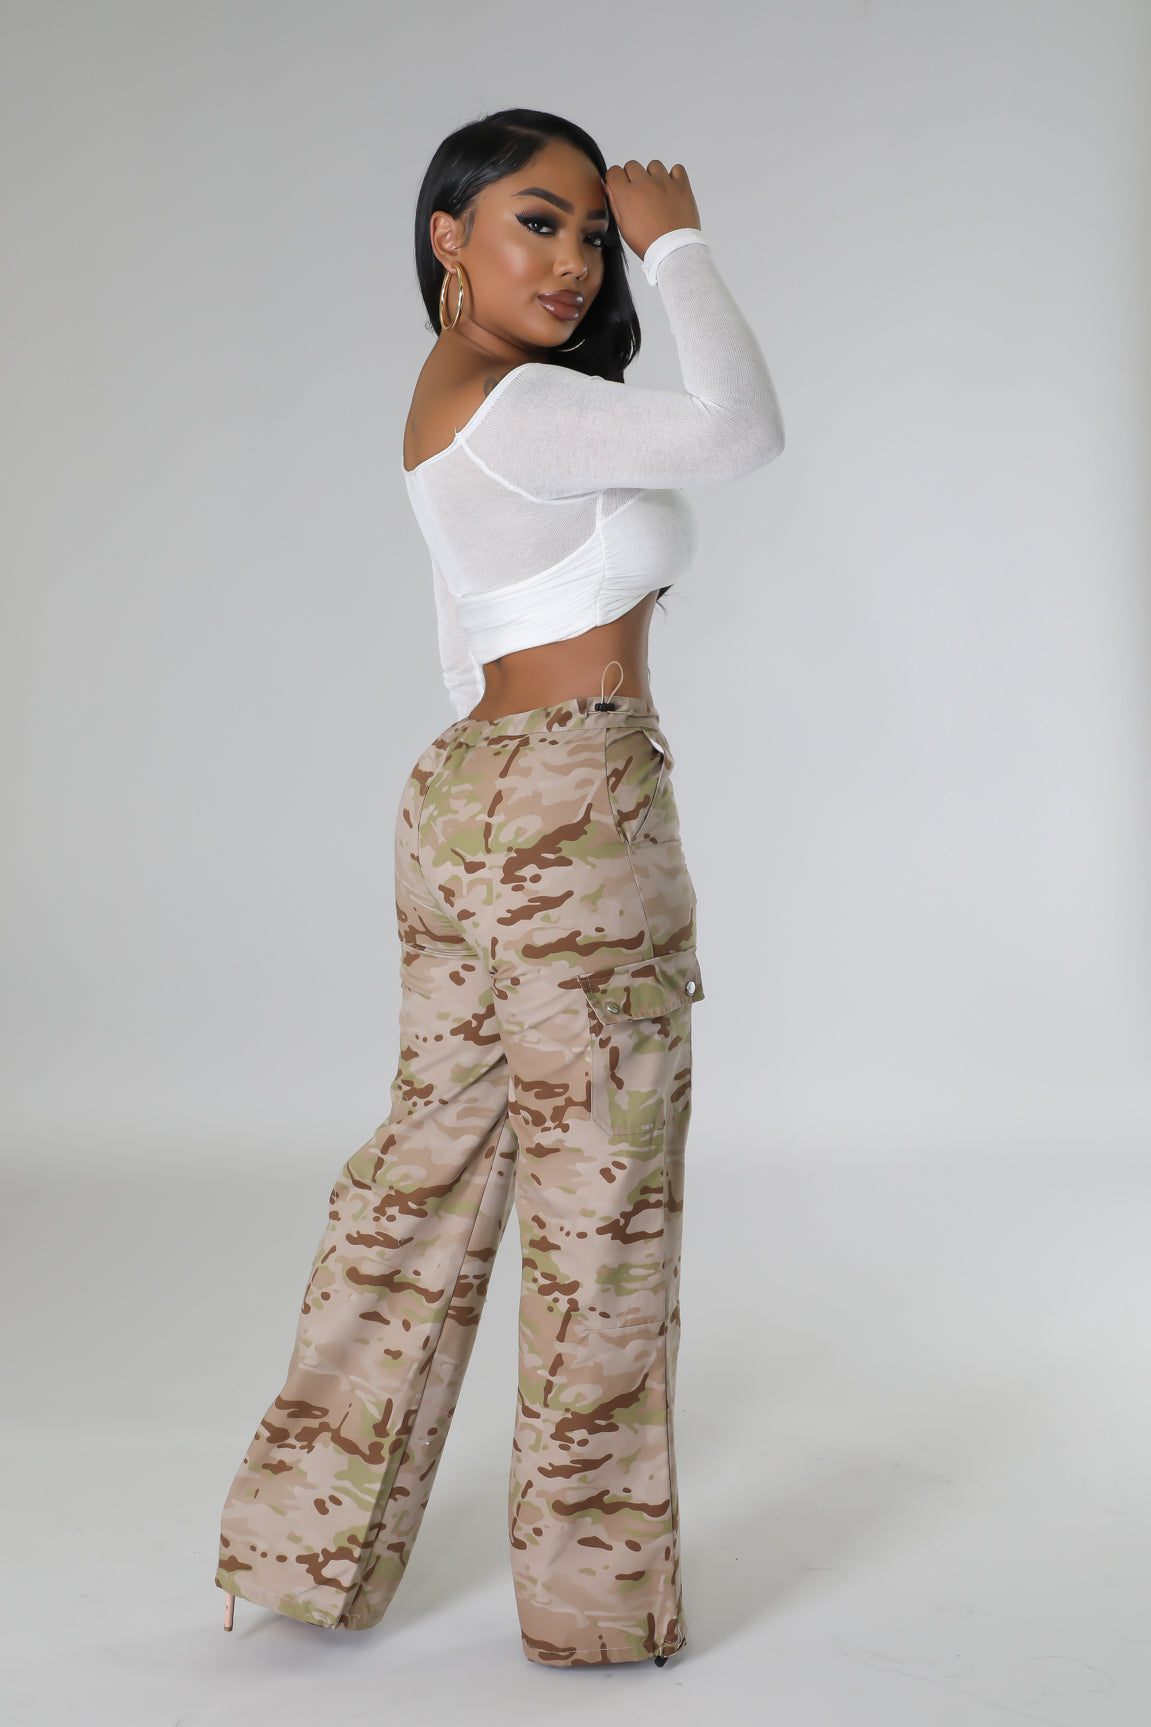 ARMY BDU PANTS Desert 3 Colors CAMOUFLAGE Cargo 6 Pockets Size 4XLarge  51